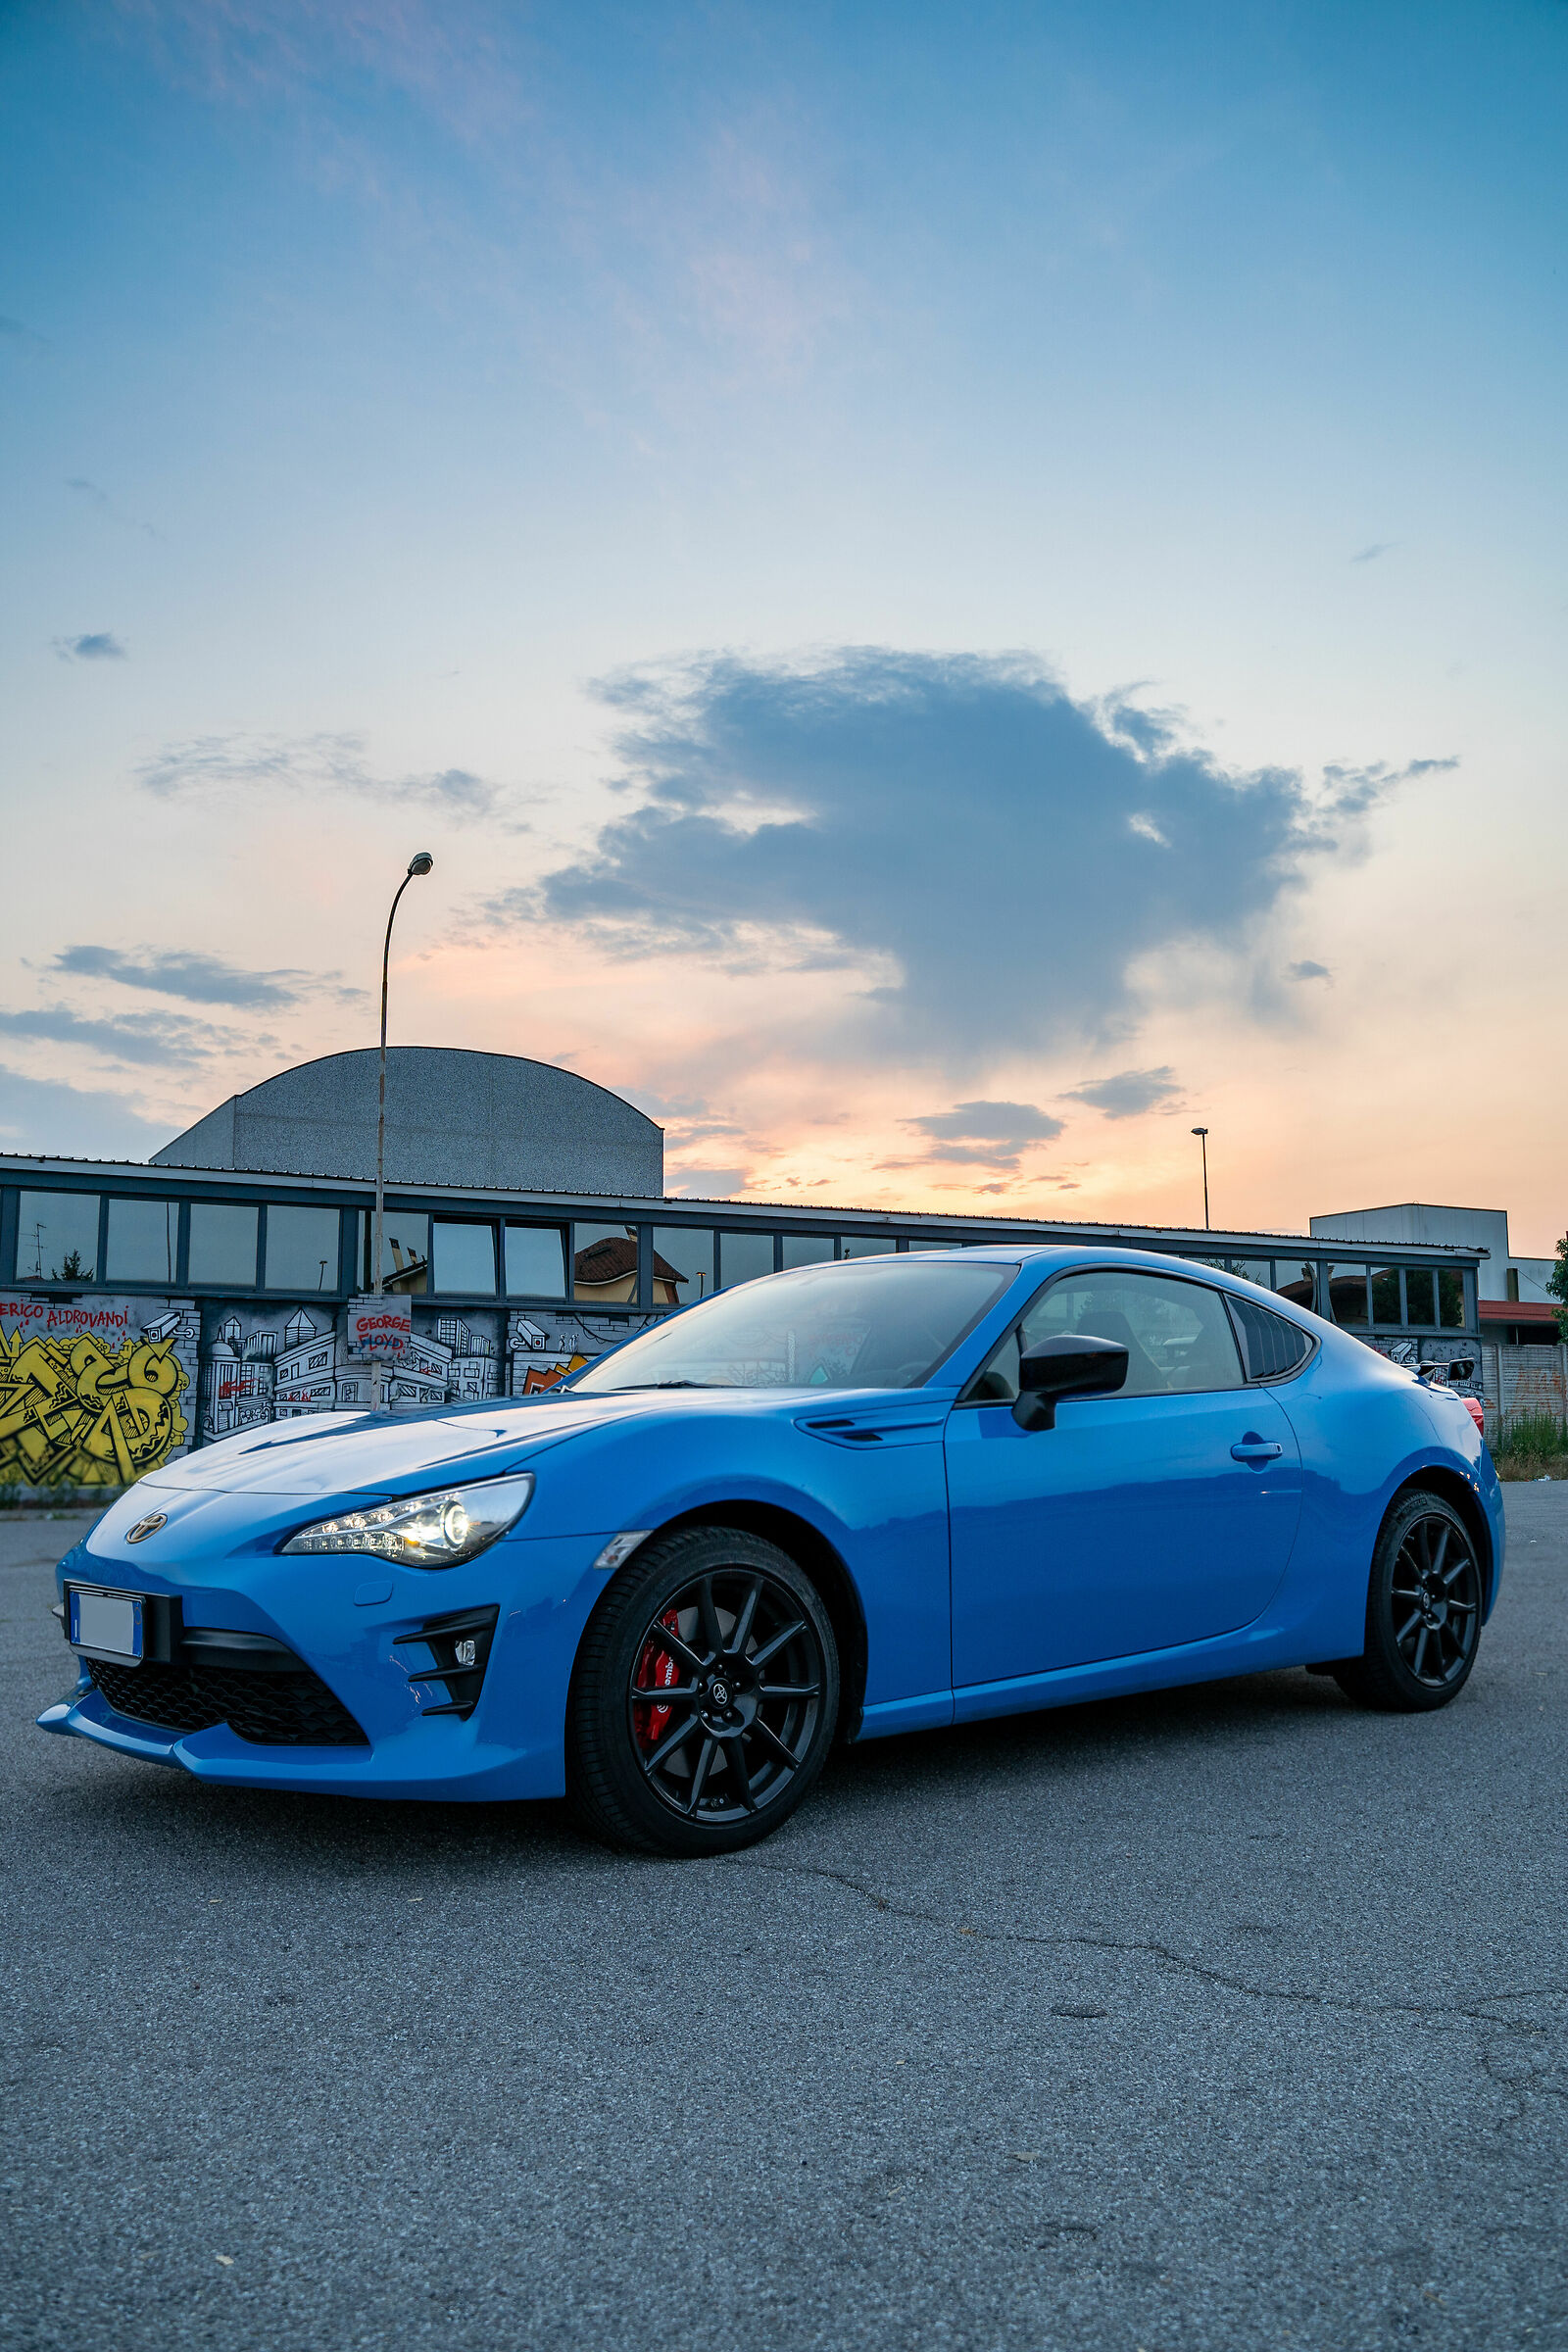 GT86 at sunset...